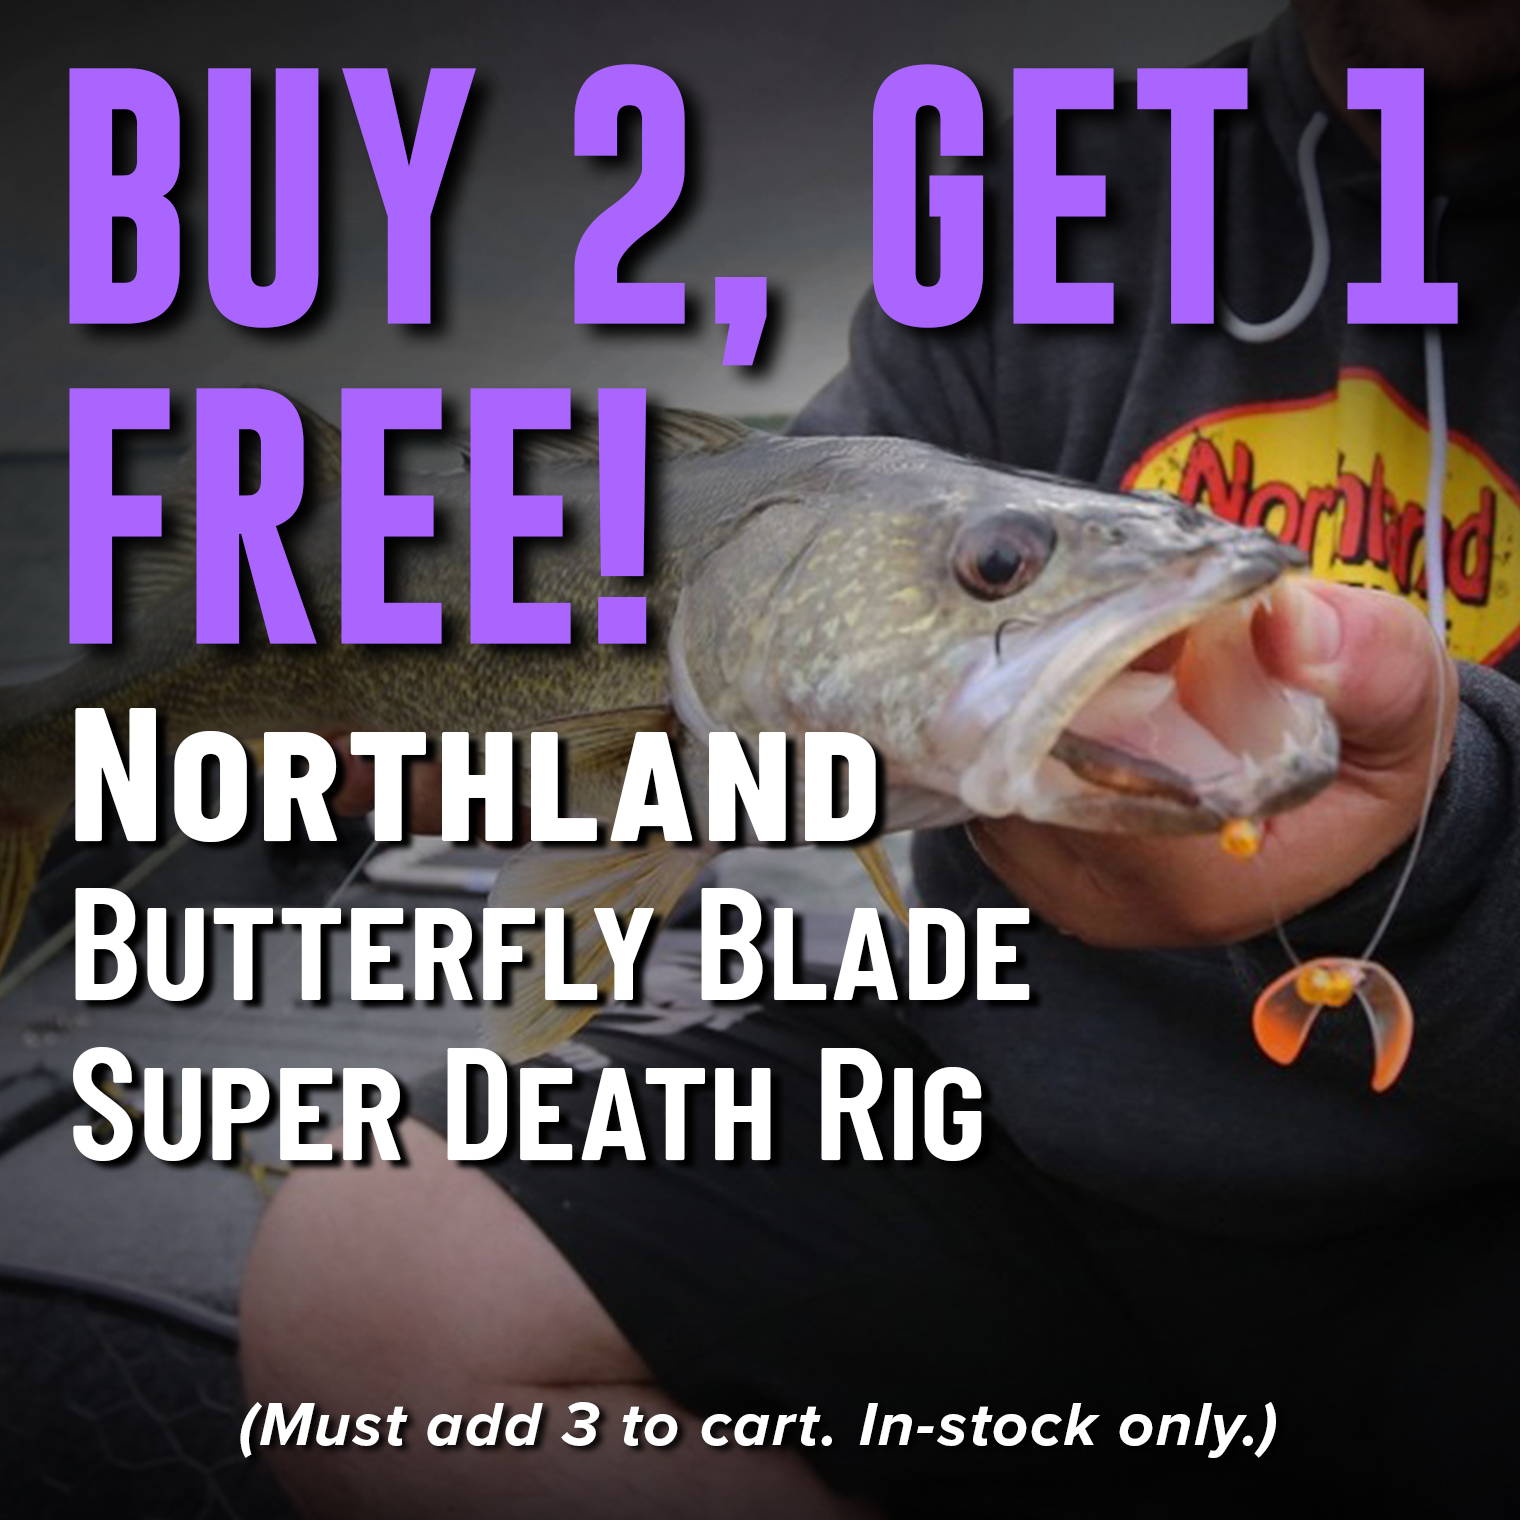 Buy 2, Get 1 Free! Northland Butterfly Blade Super Death Rig (Must add 3 to cart. In-stock only.)